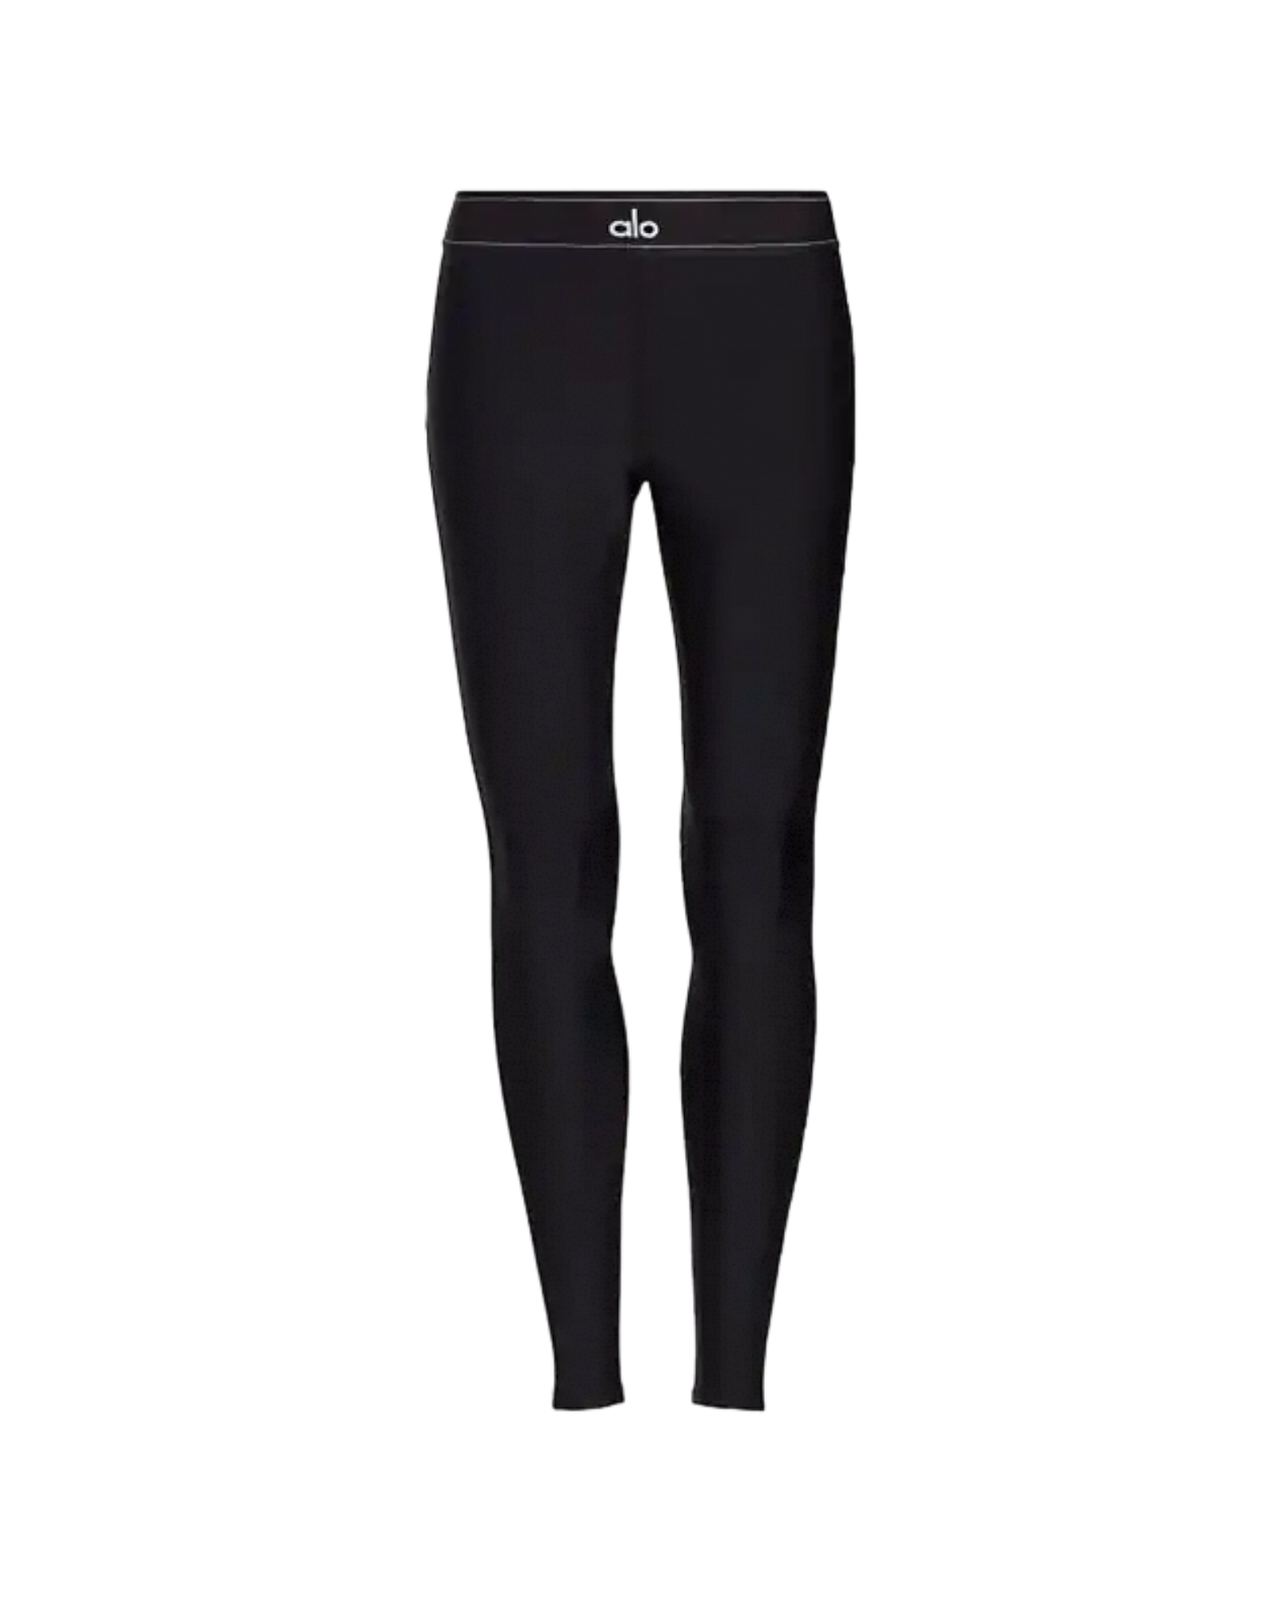 Airlift High-waist Suit Up Legging In Anthracite - STORiES Hong Kong